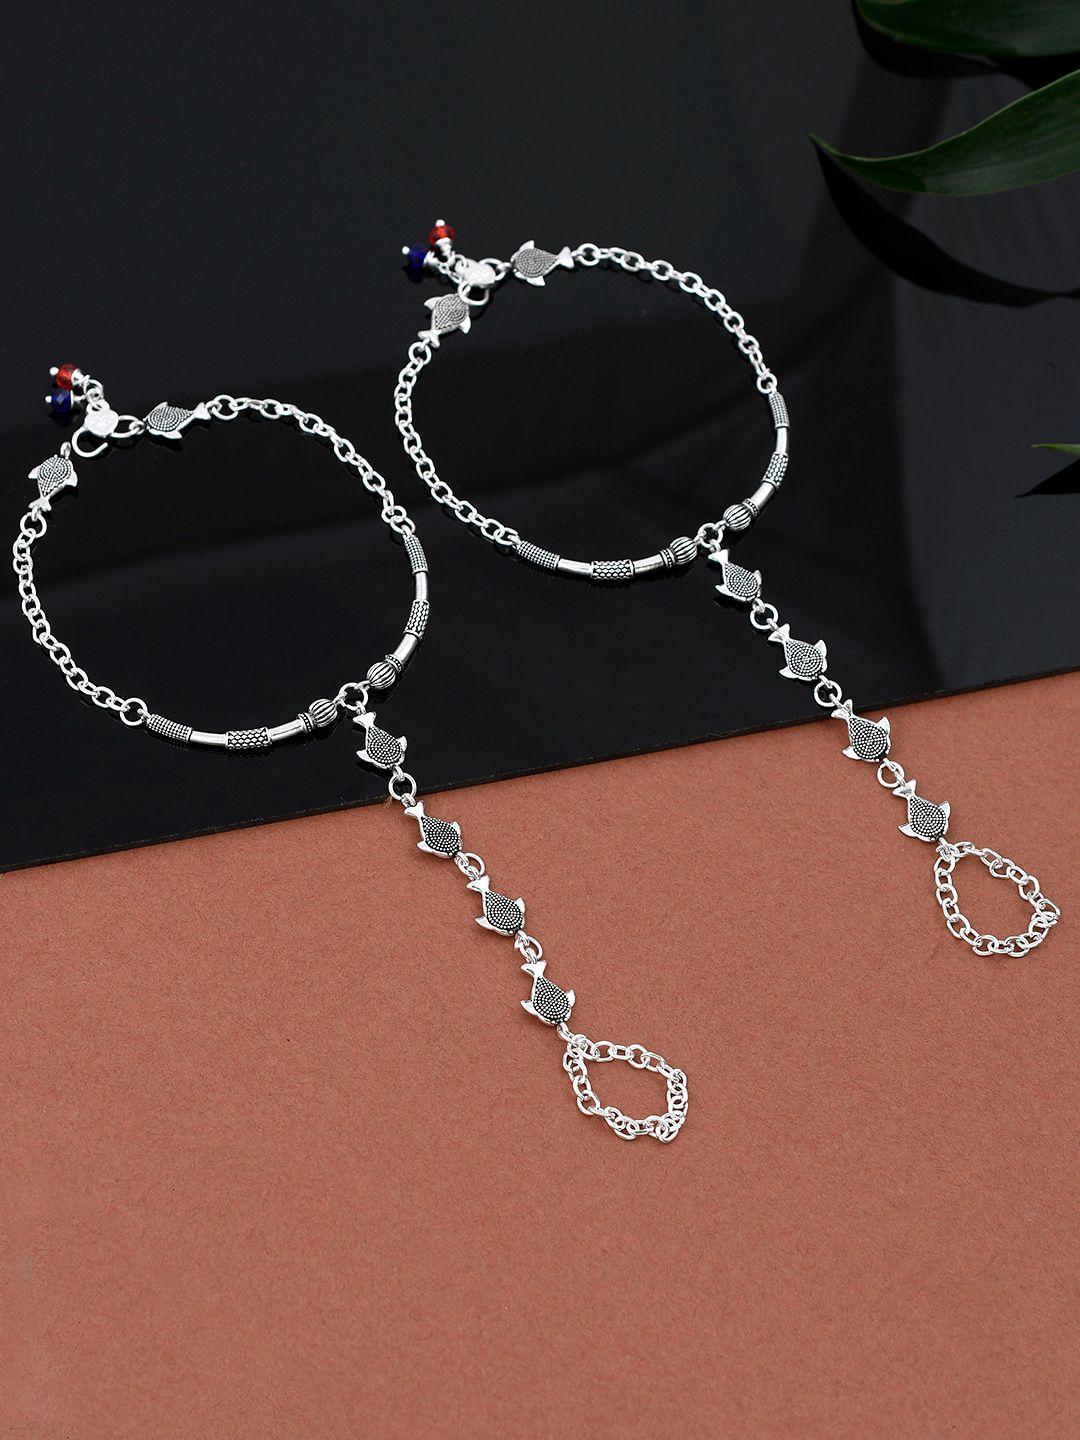 silvermerc designs set of 2 silver-plated & beaded anklets